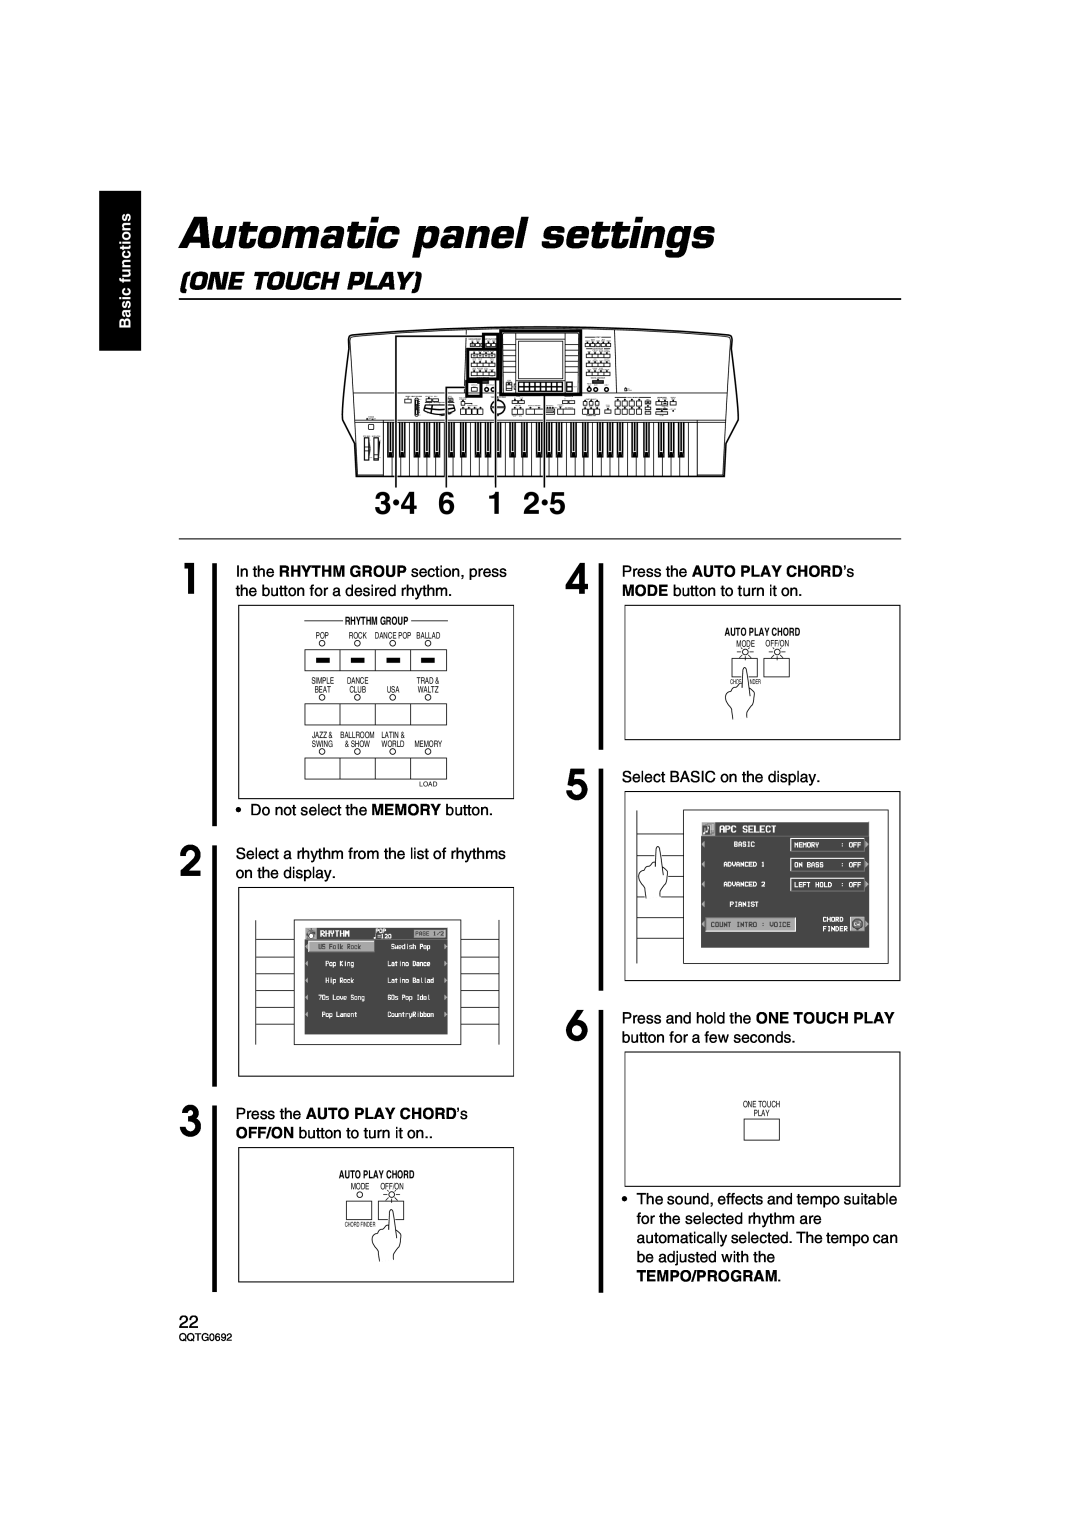 Panasonic SX-KN2600 Automatic panel settings, One Touch Play, Press the AUTO PLAY CHORD’s OFF/ON button to turn it on 